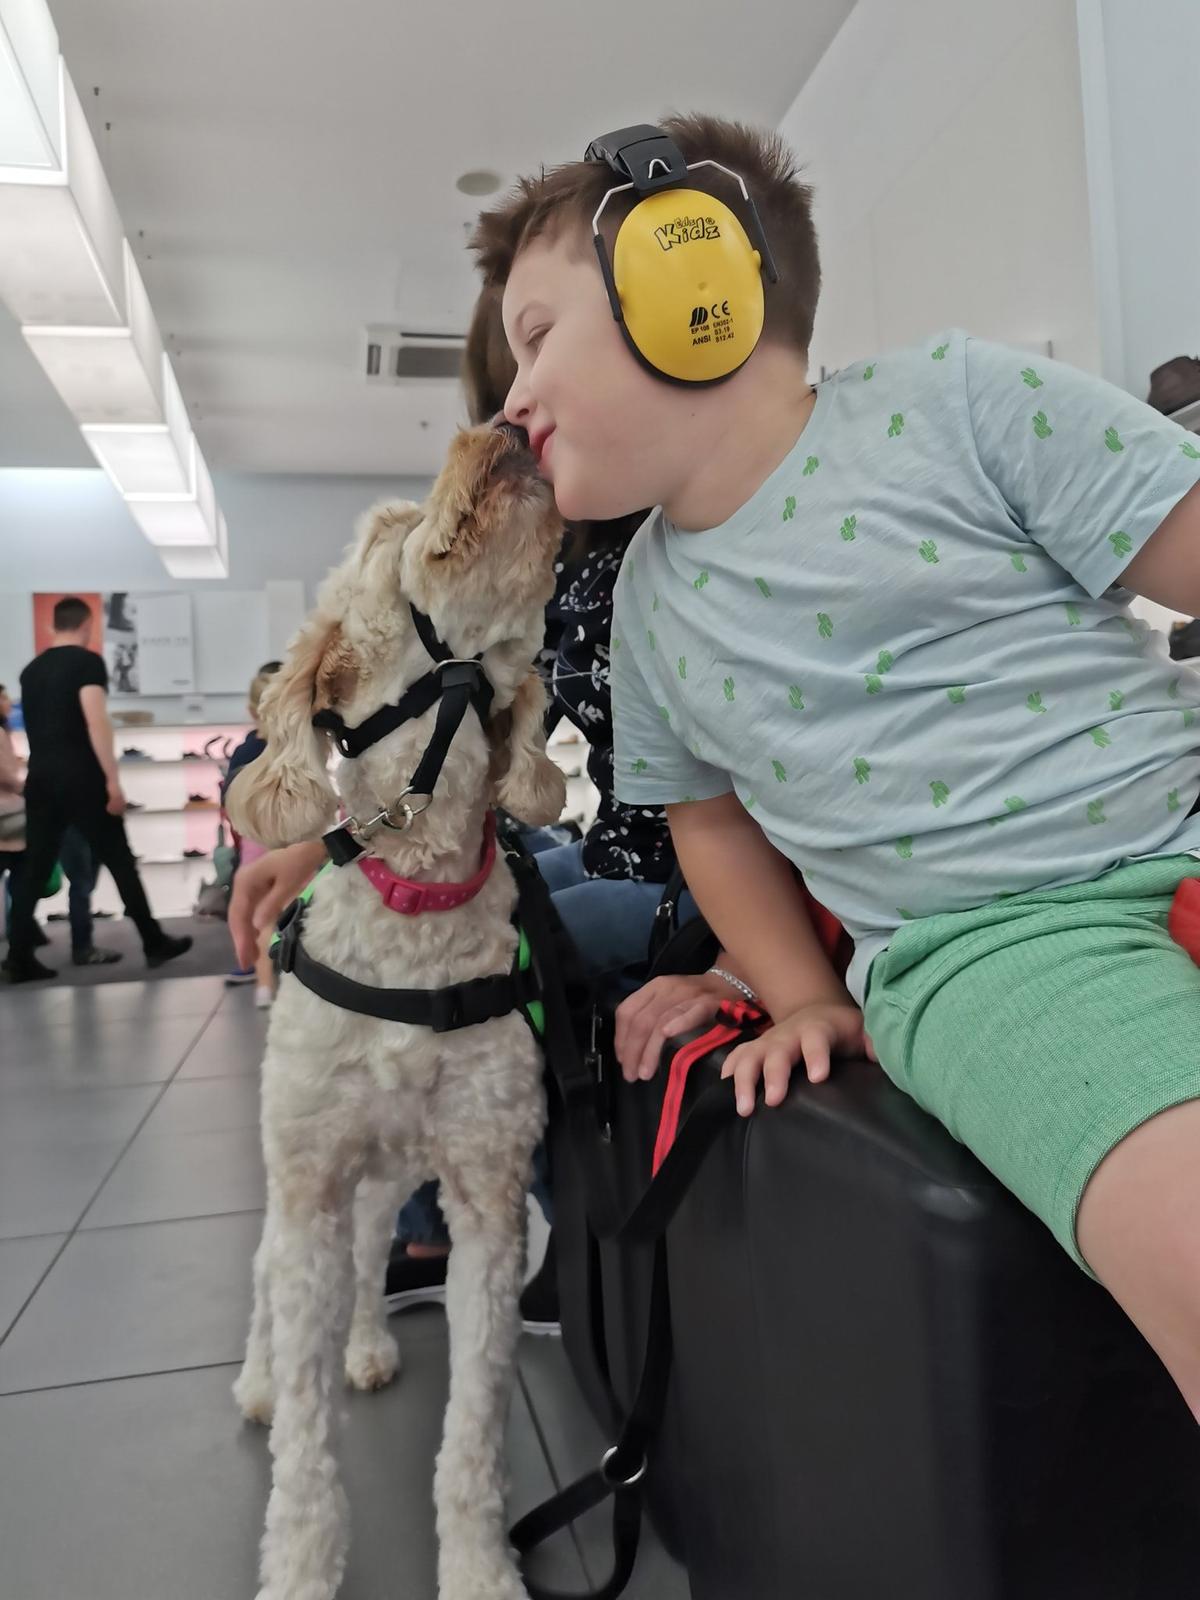 Riley with Willow while shopping for a new pair of shoes for school. (Courtesy of <a href="https://www.facebook.com/myboyblue2017/">Nicole Duggan</a>)